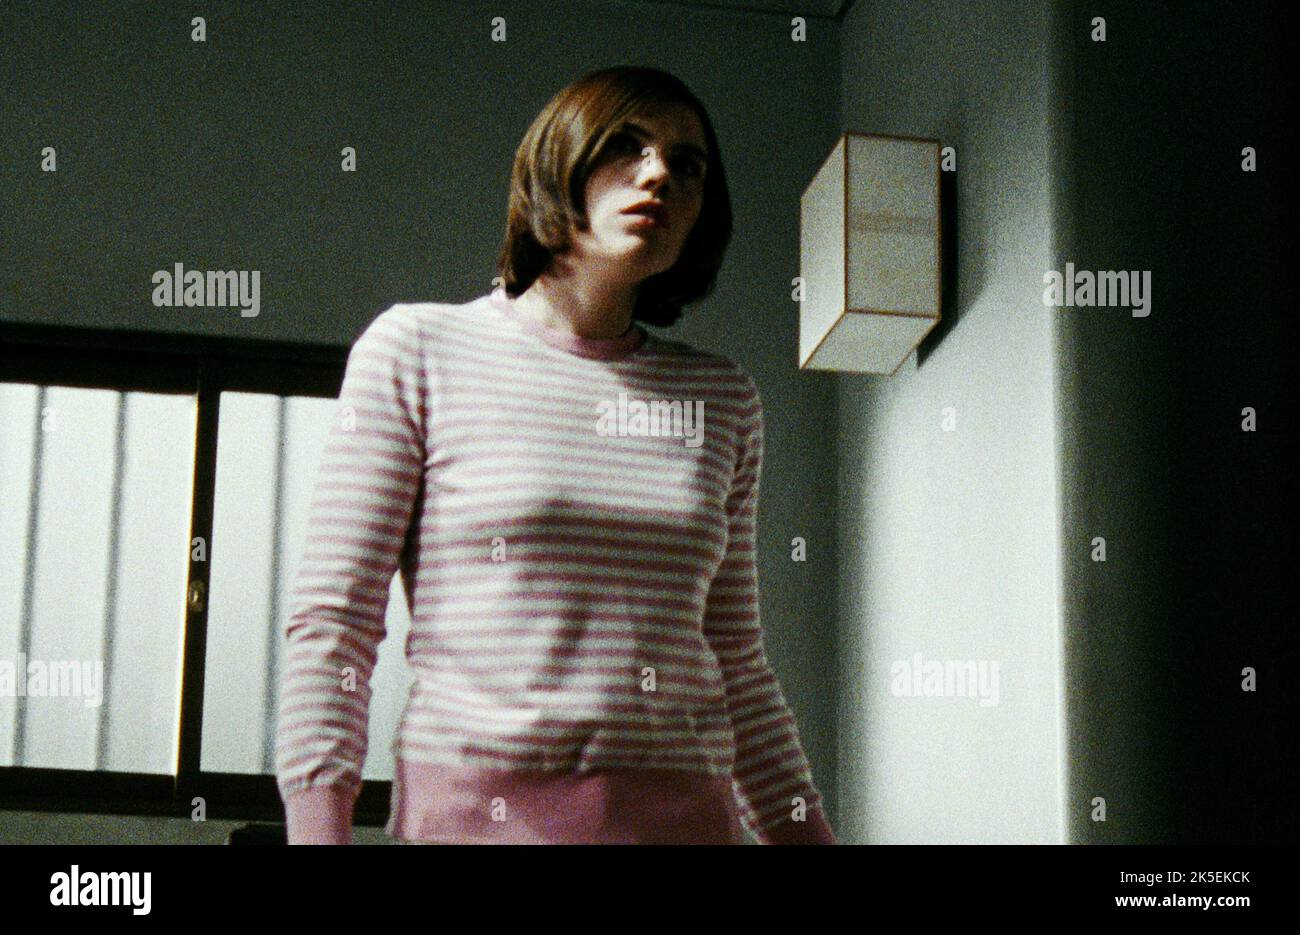 CLEA DUVALL, THE GRUDGE, 2004 Stock Photo